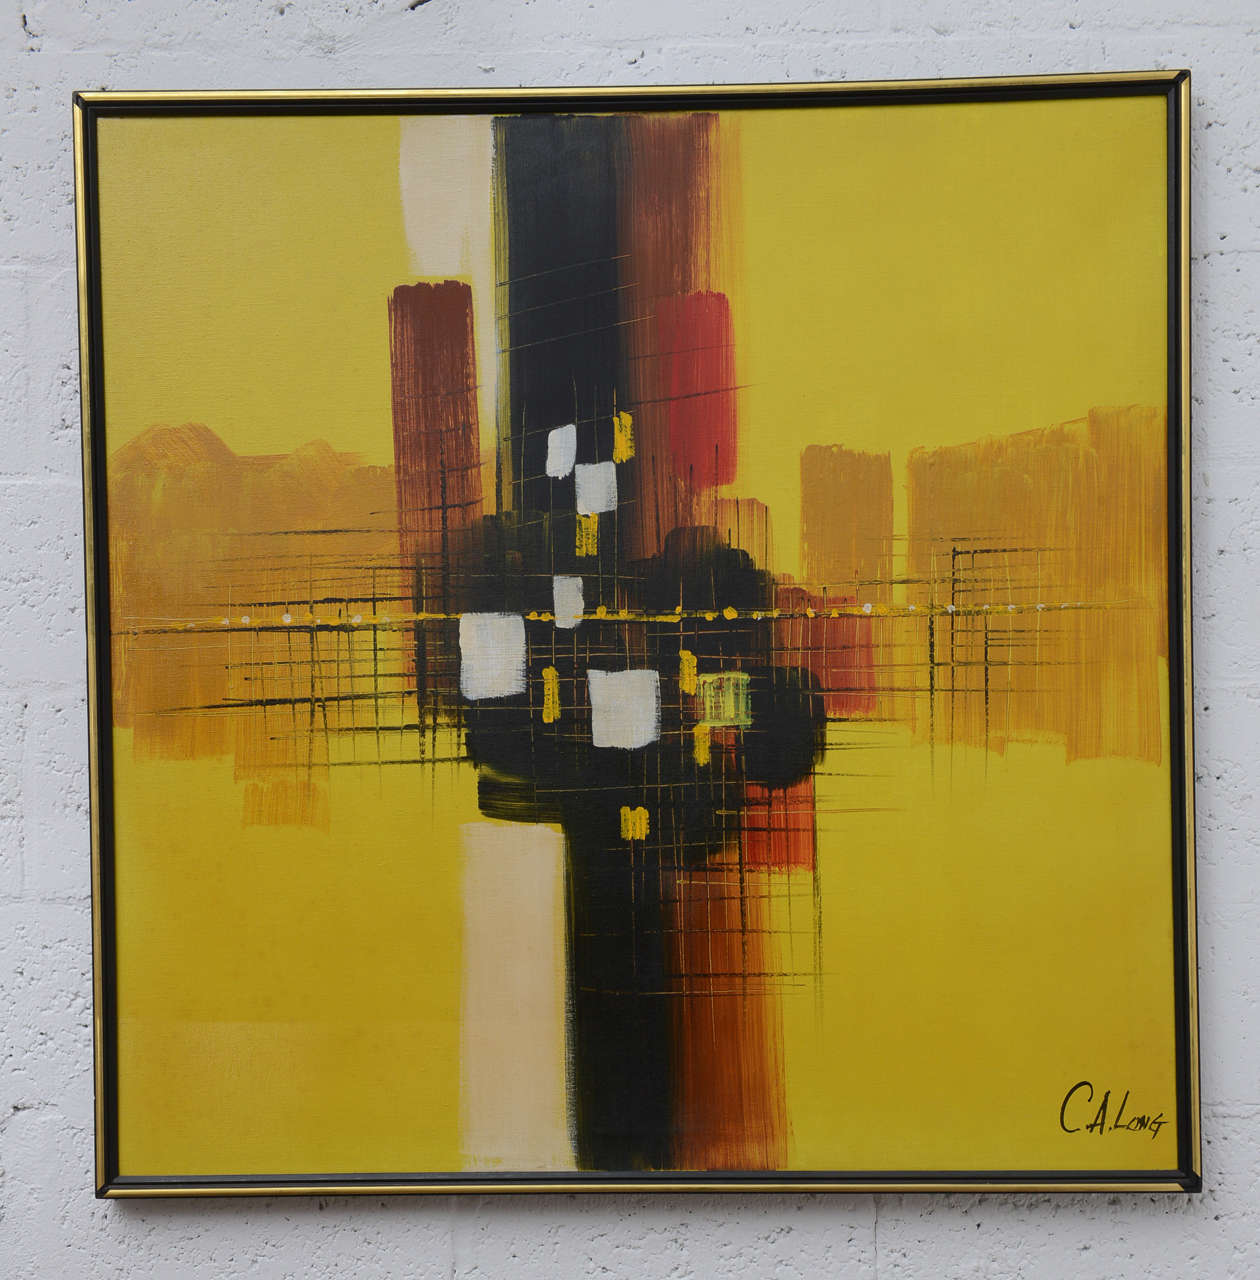 Beautiful framed MCM geometric acrylic painting by C.A.Long.  Perfect for any MCM setting in terms of color and composition.  1960s USA